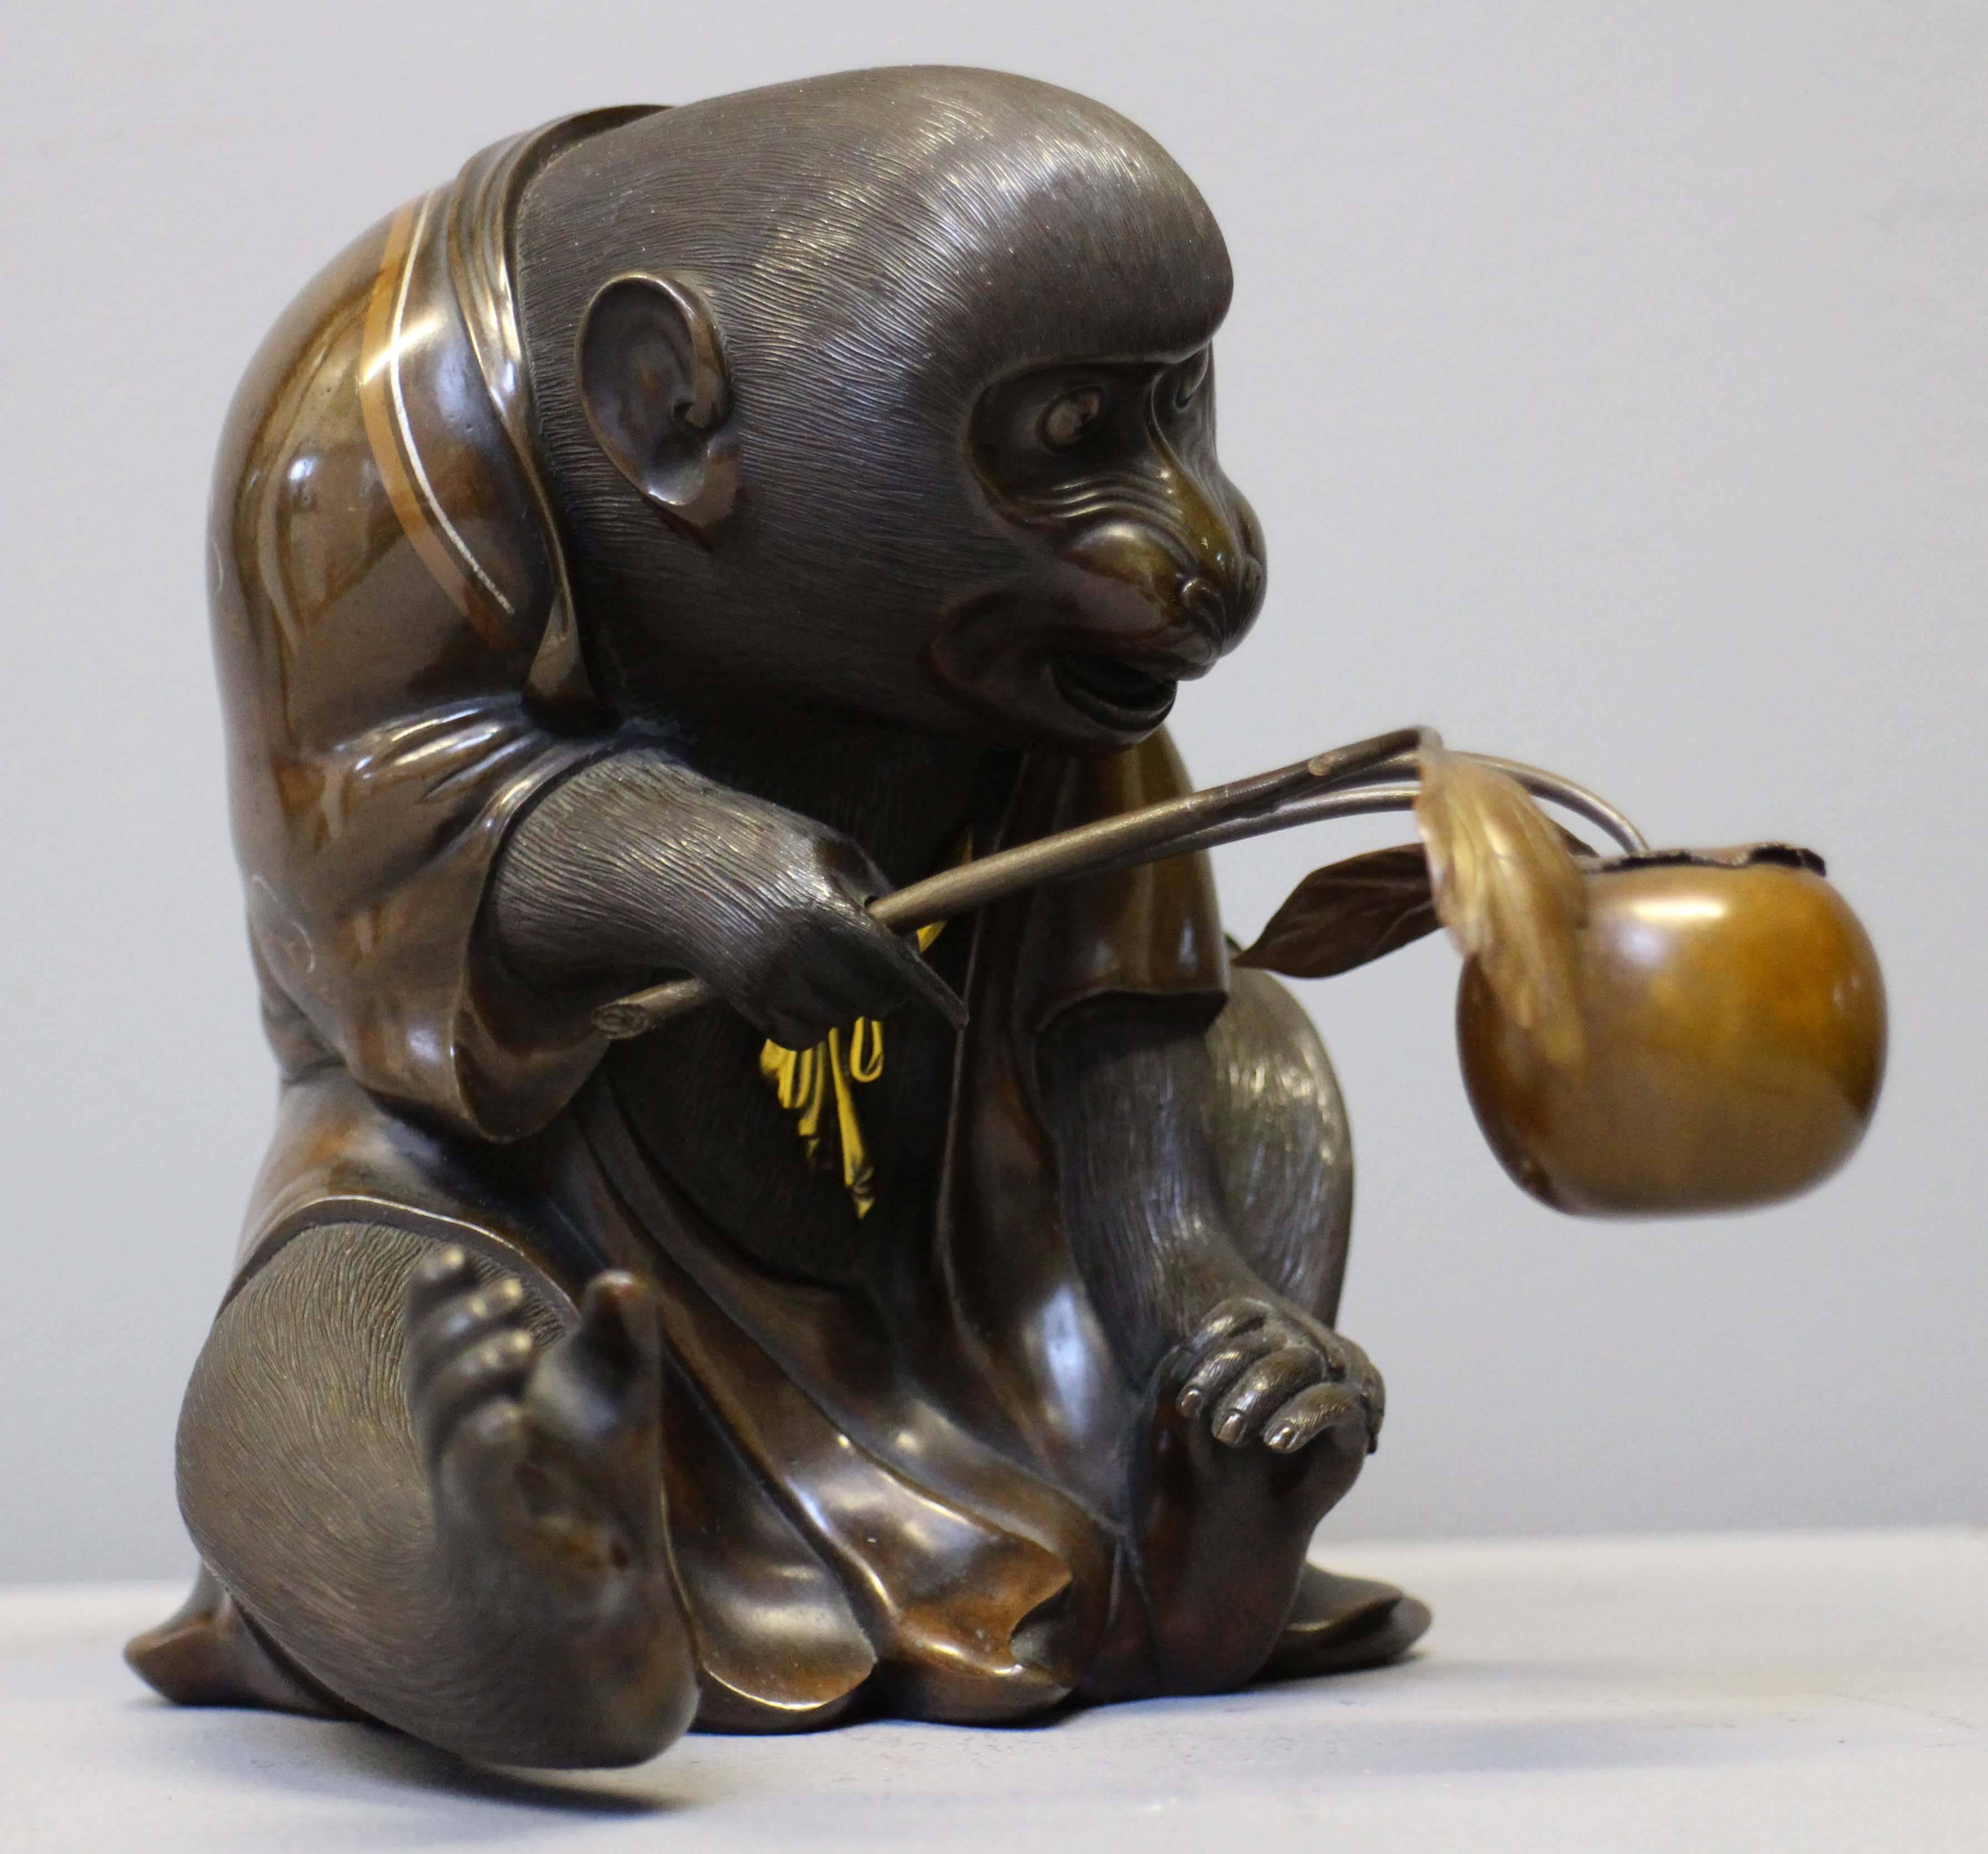 An unusual antique Japanese bronze monkey with multimetal inlaid decoration, wearing a copper coloured kimono, decorated with detailed silvered origami cranes, holding a large peach on a branch.

The multimetal inlay and natural antique patina of